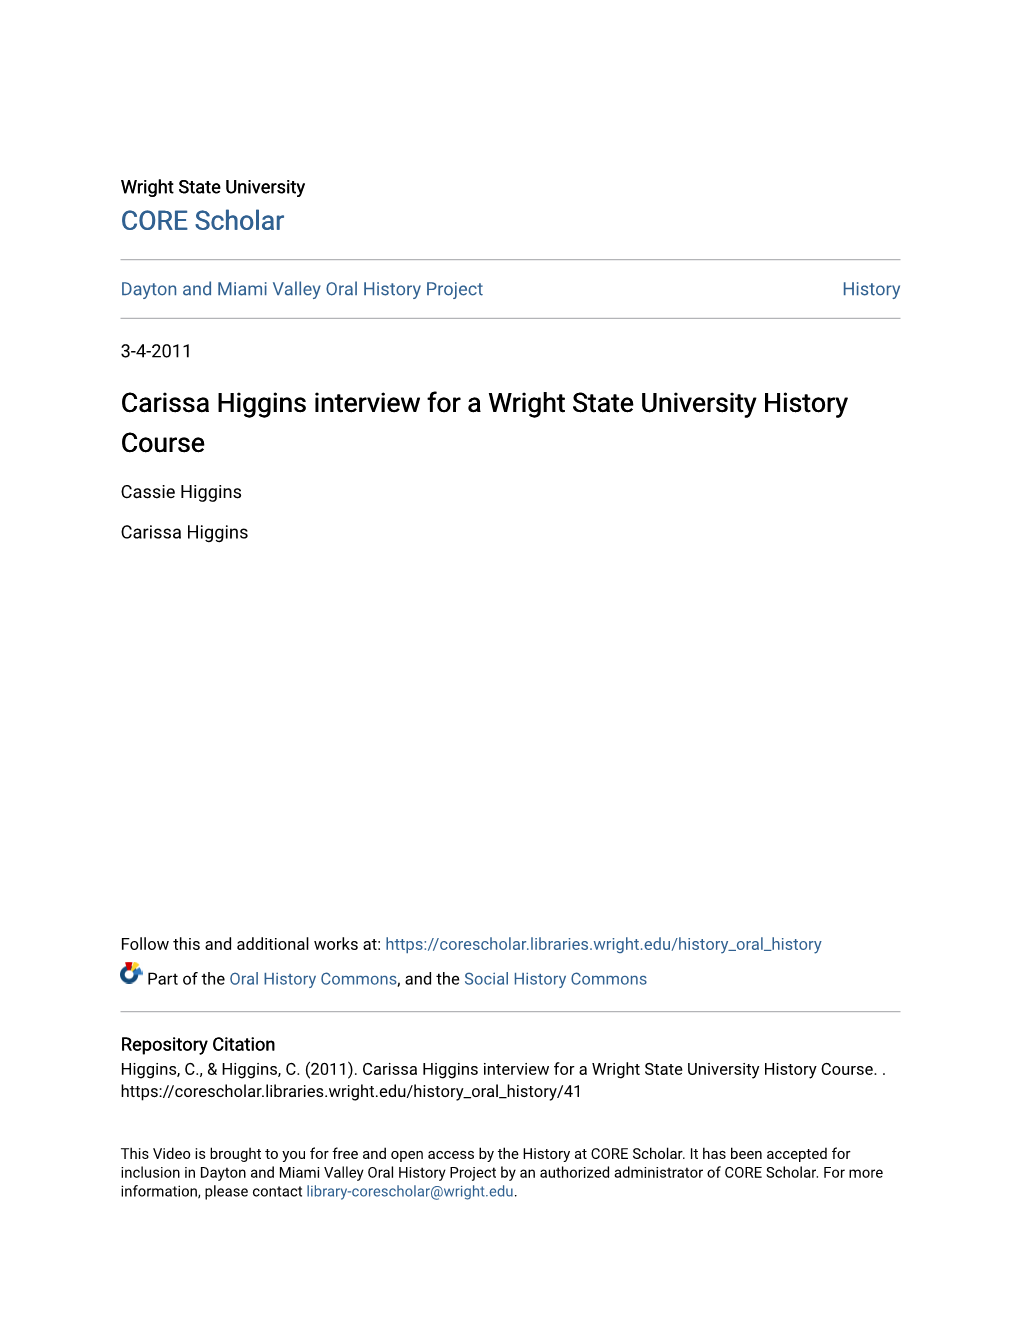 Carissa Higgins Interview for a Wright State University History Course